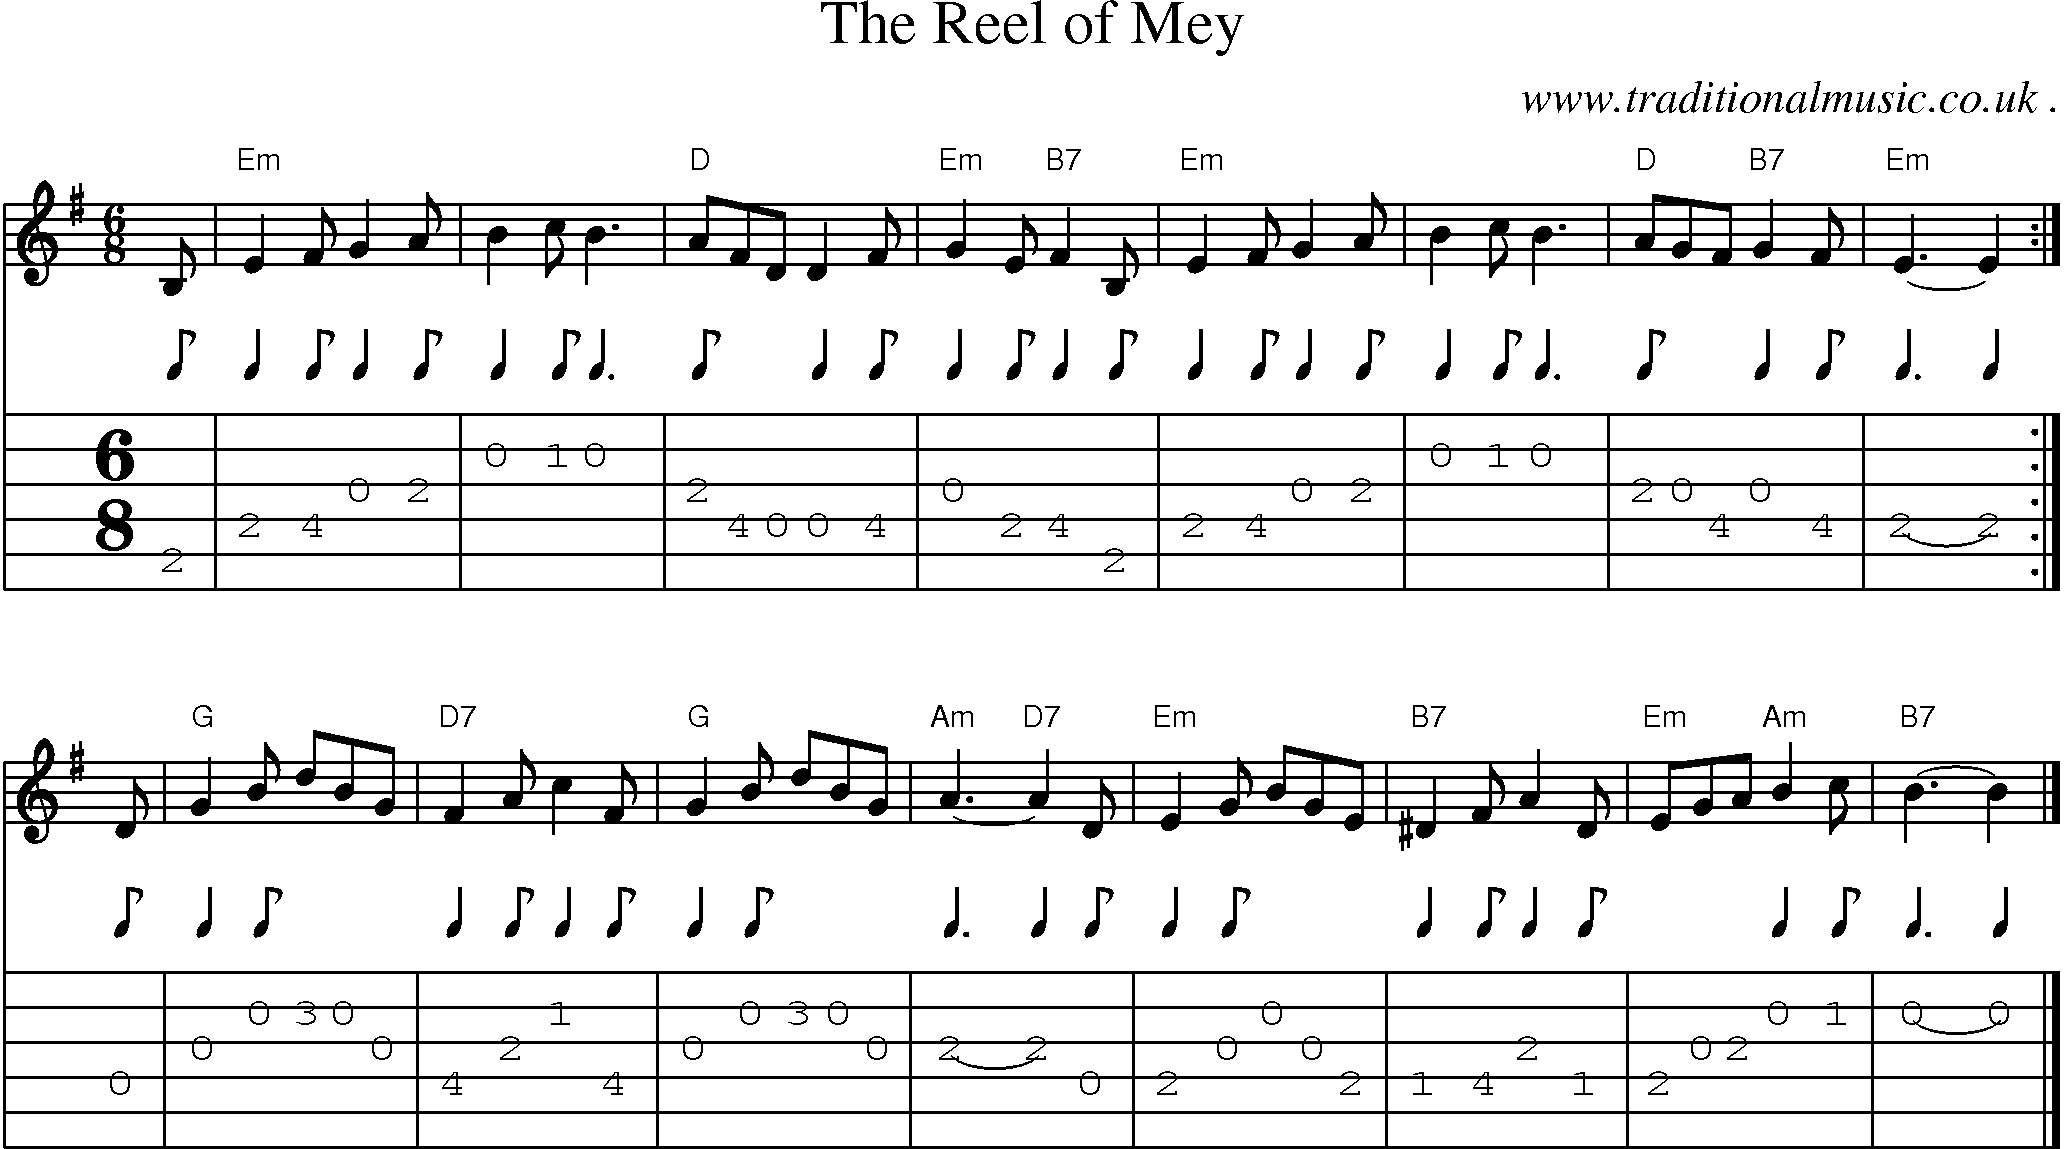 Sheet-music  score, Chords and Guitar Tabs for The Reel Of Mey